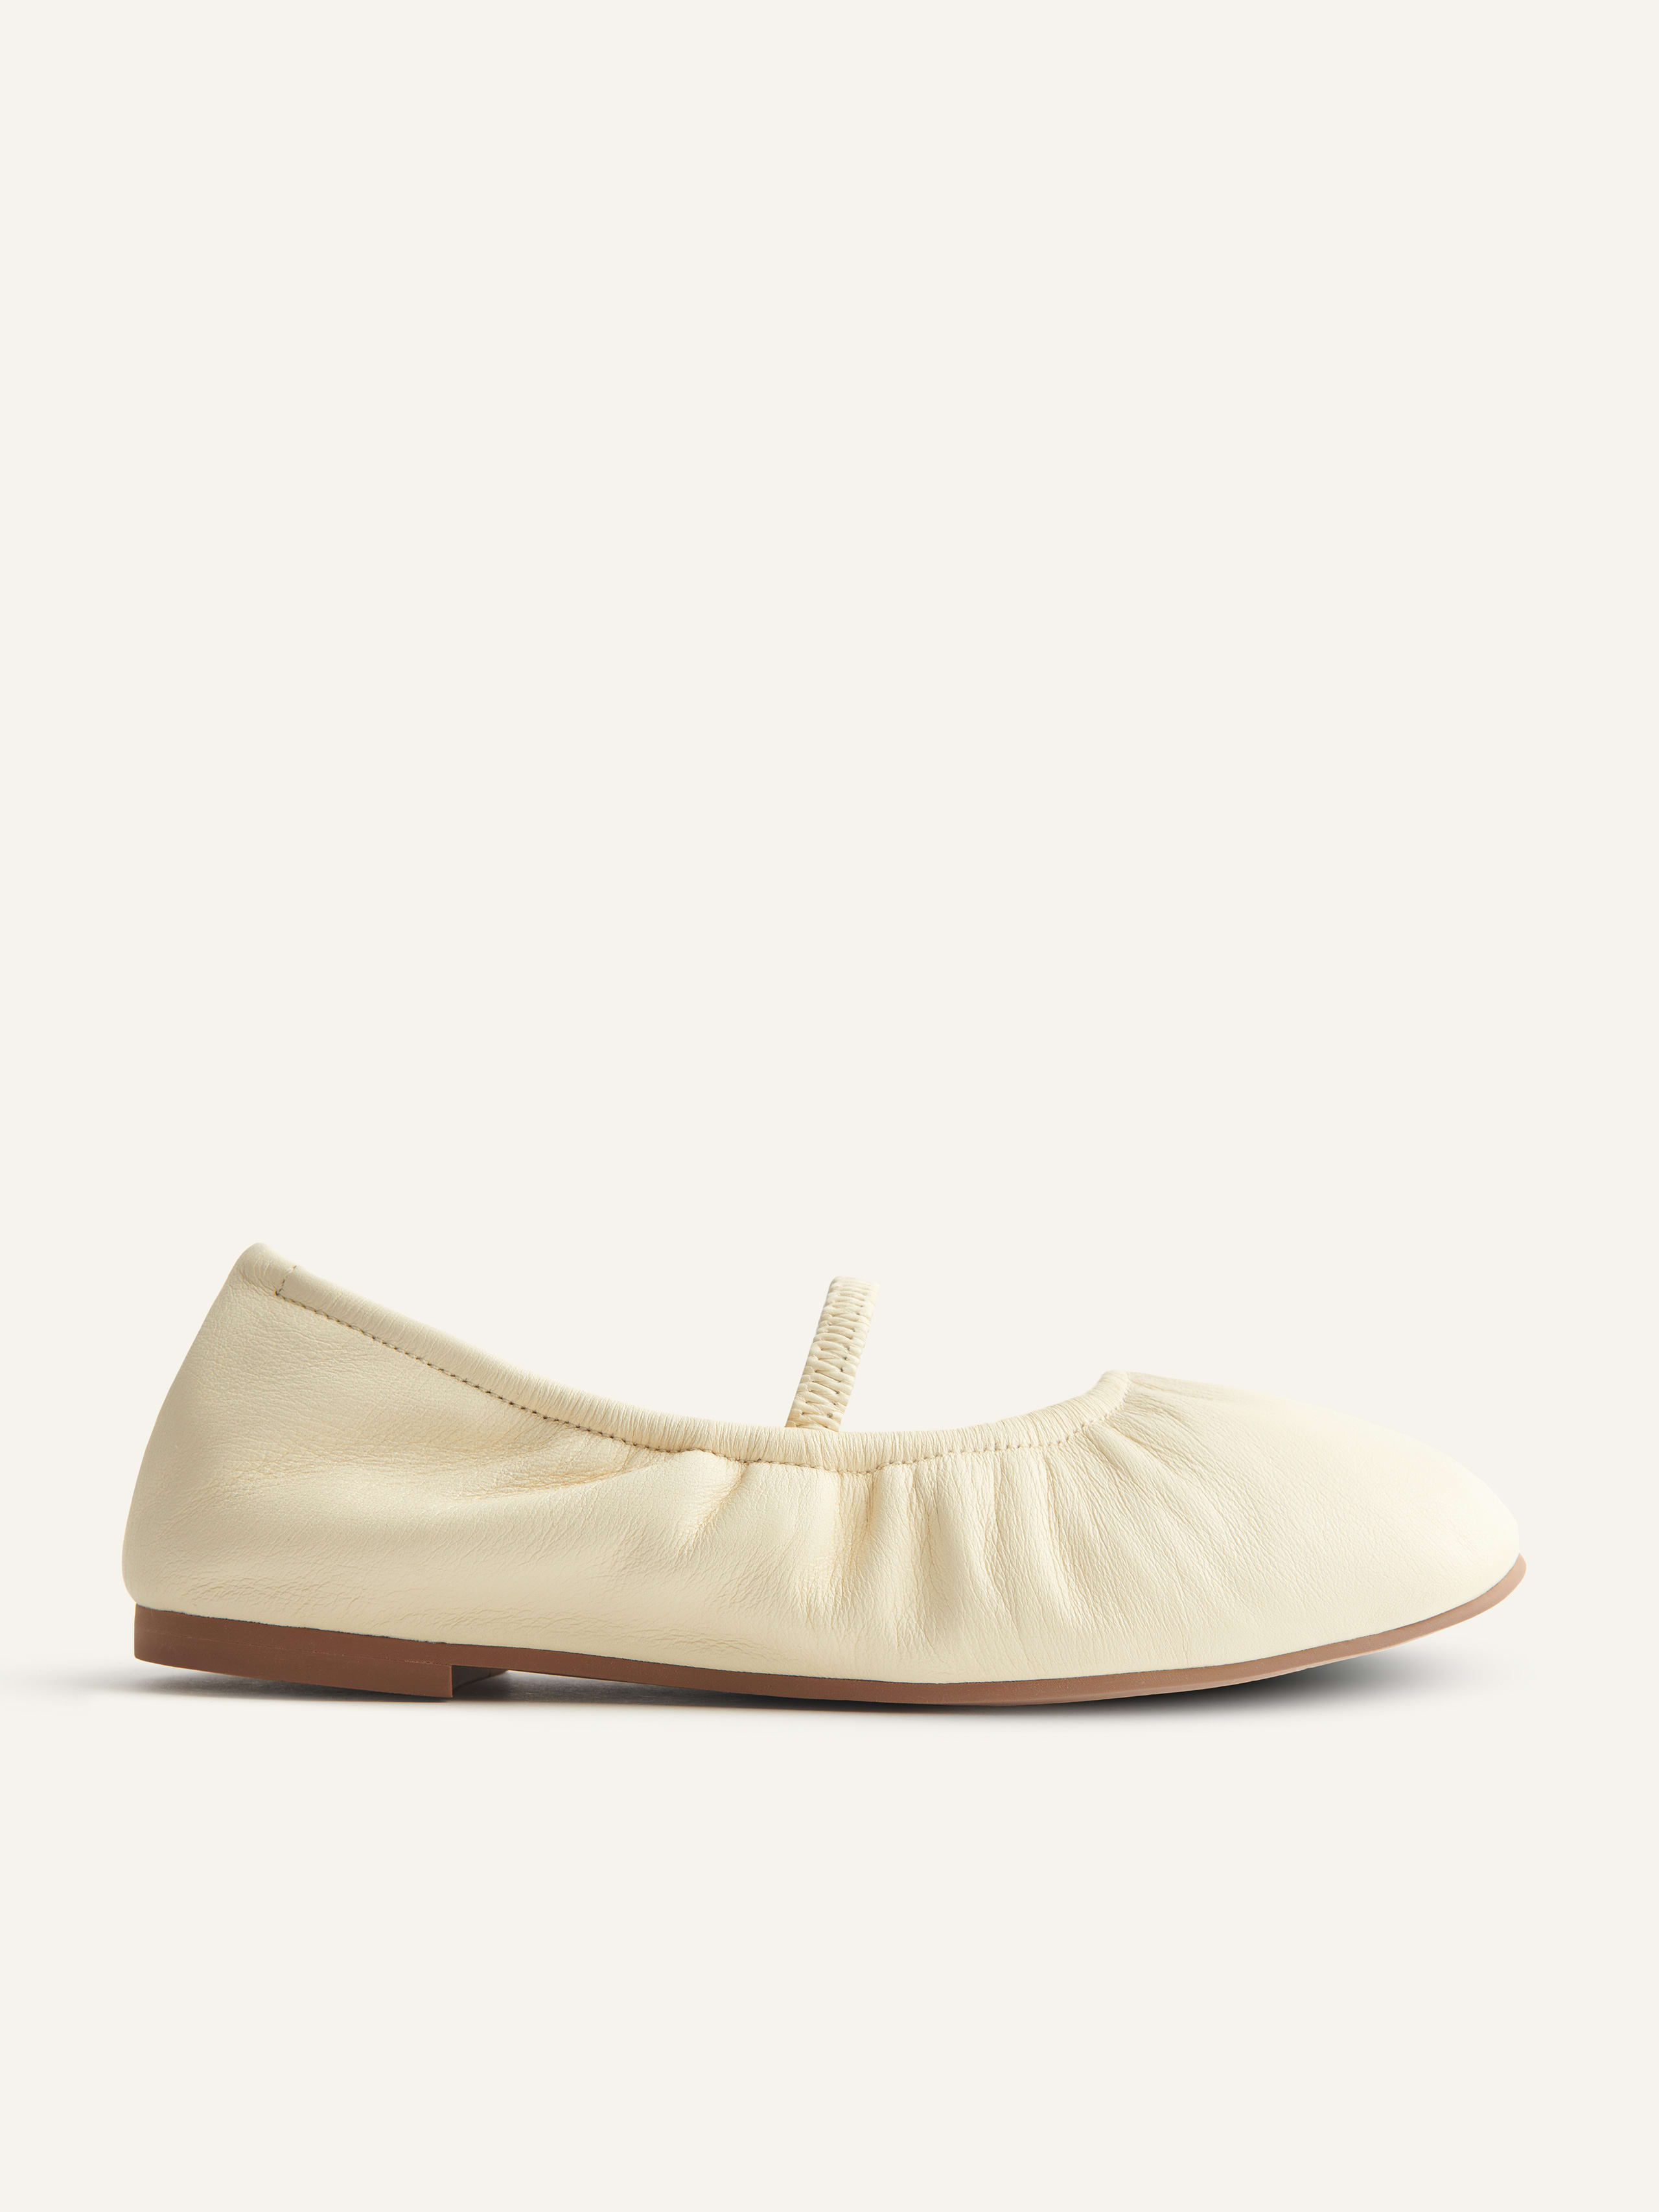 Buffy Ruched Ballet Flat, image 1